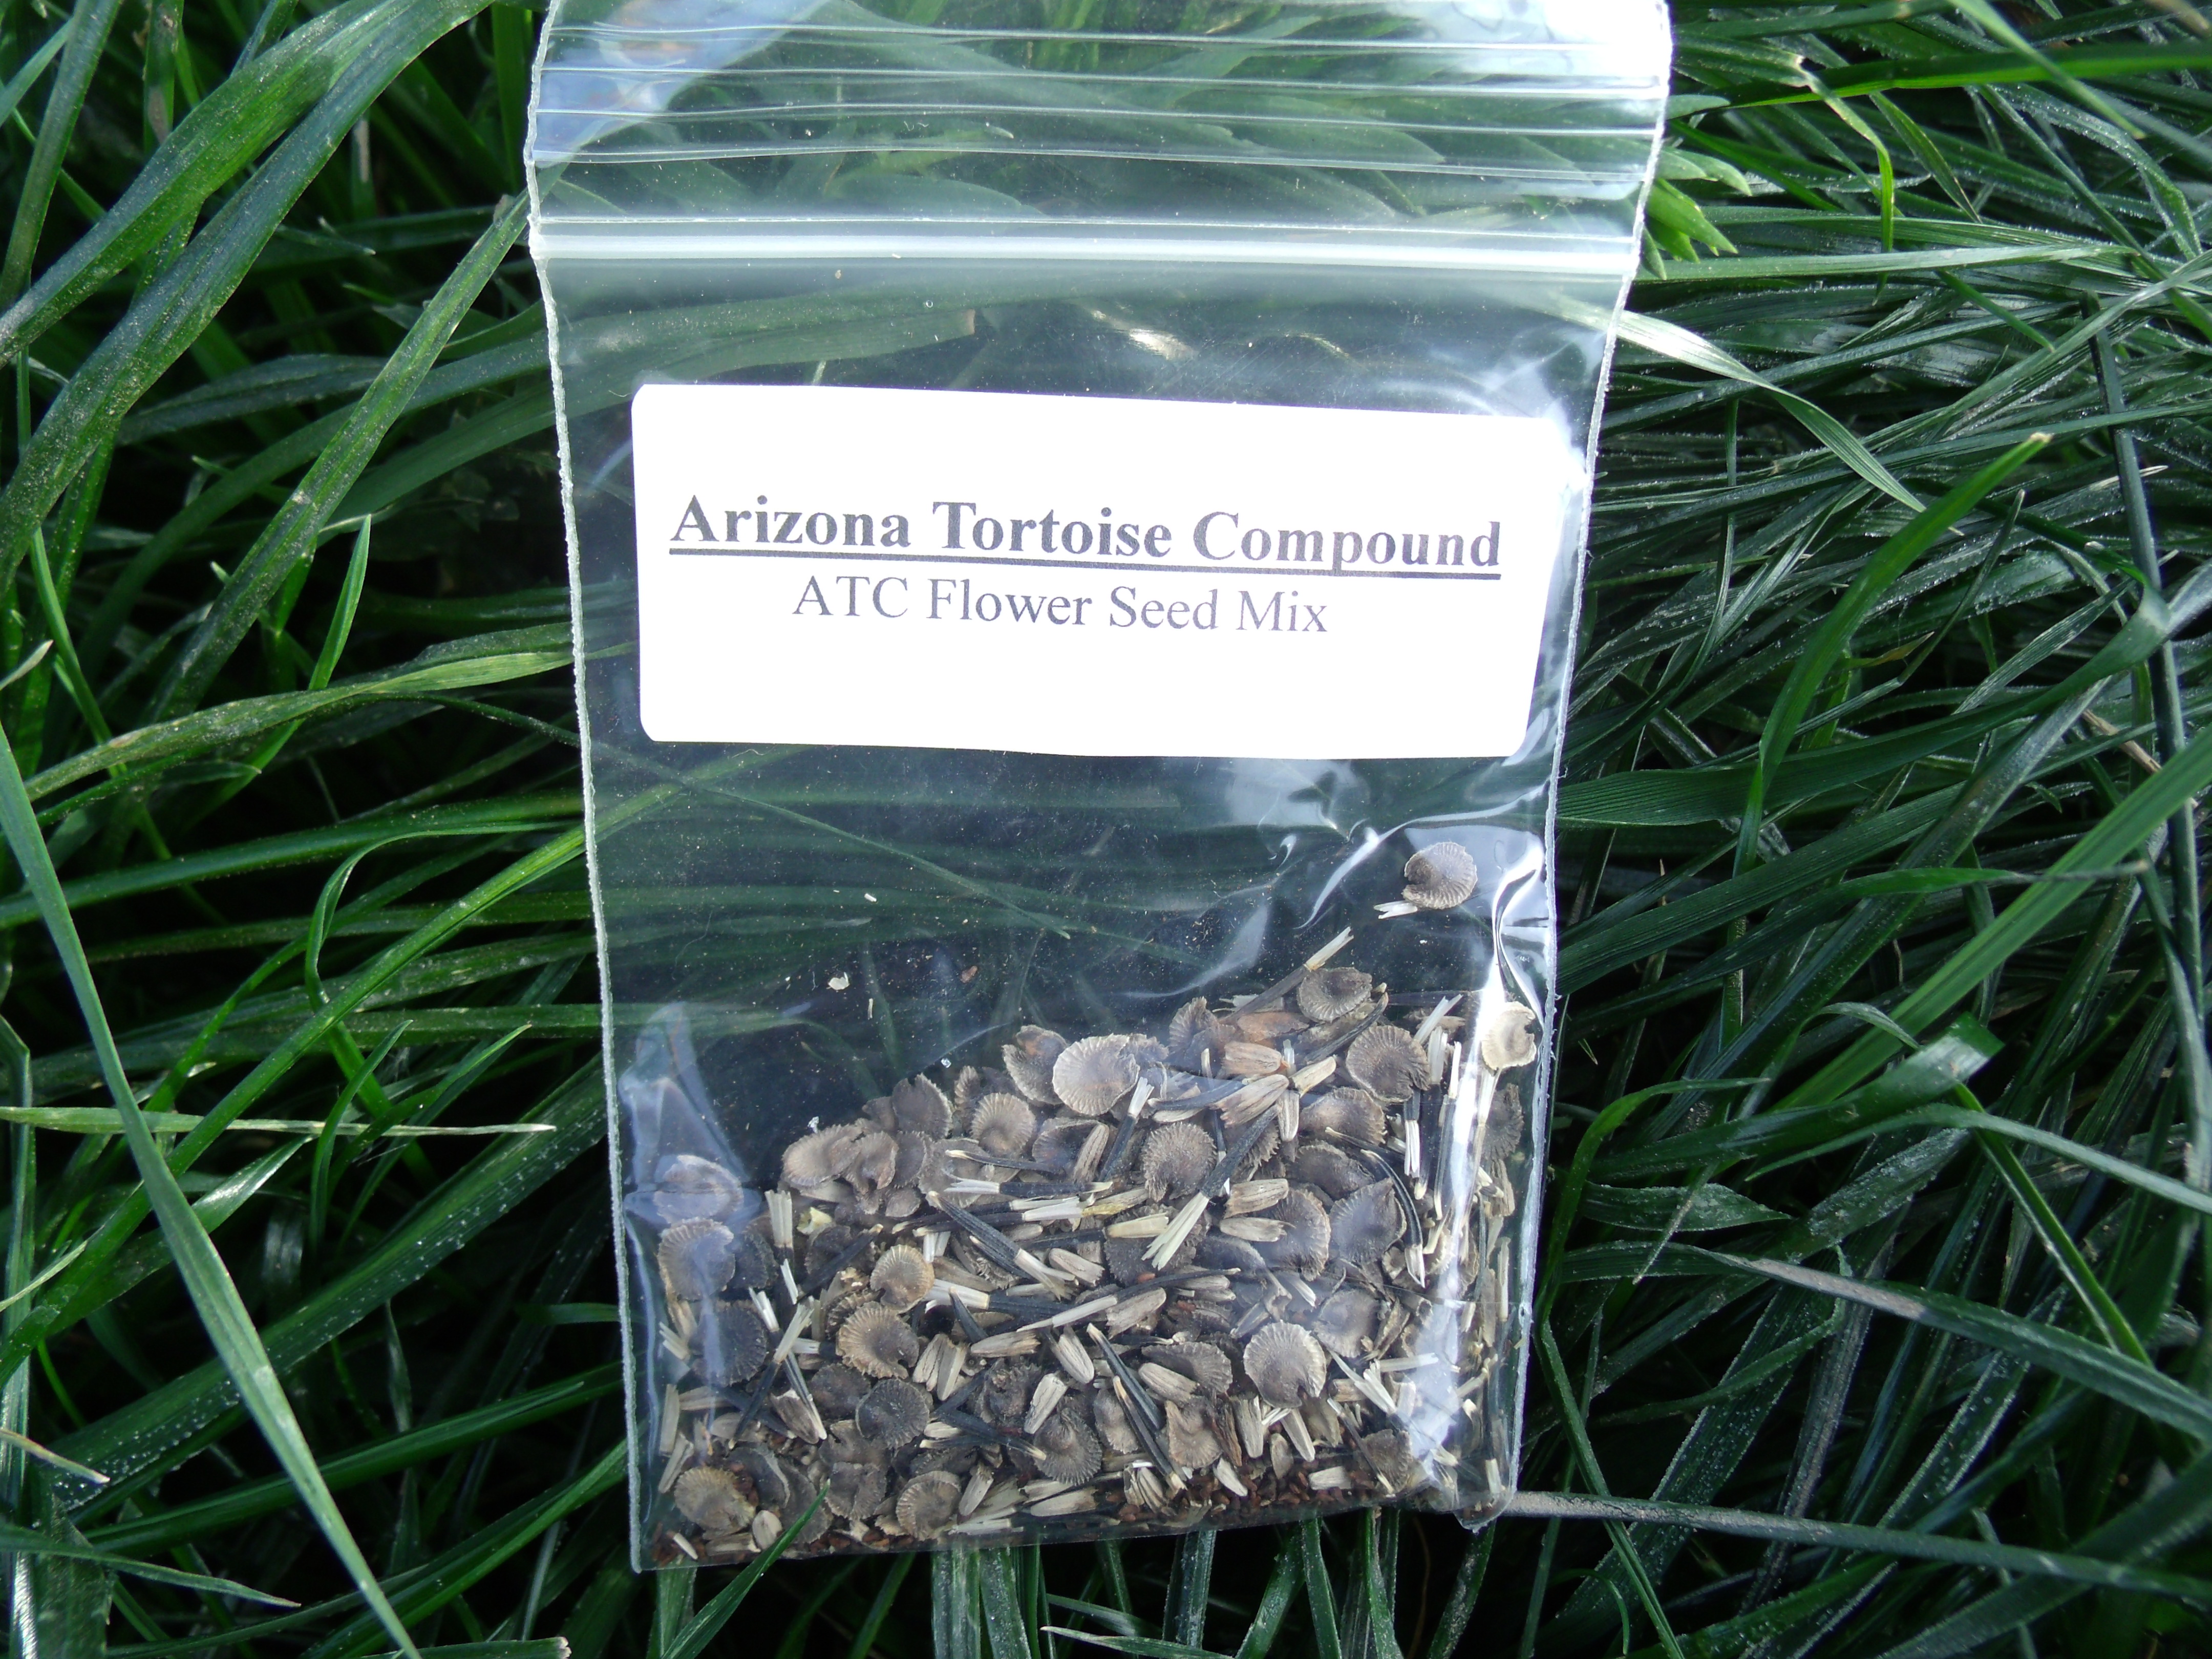 A.T.C. Flower Seed mix